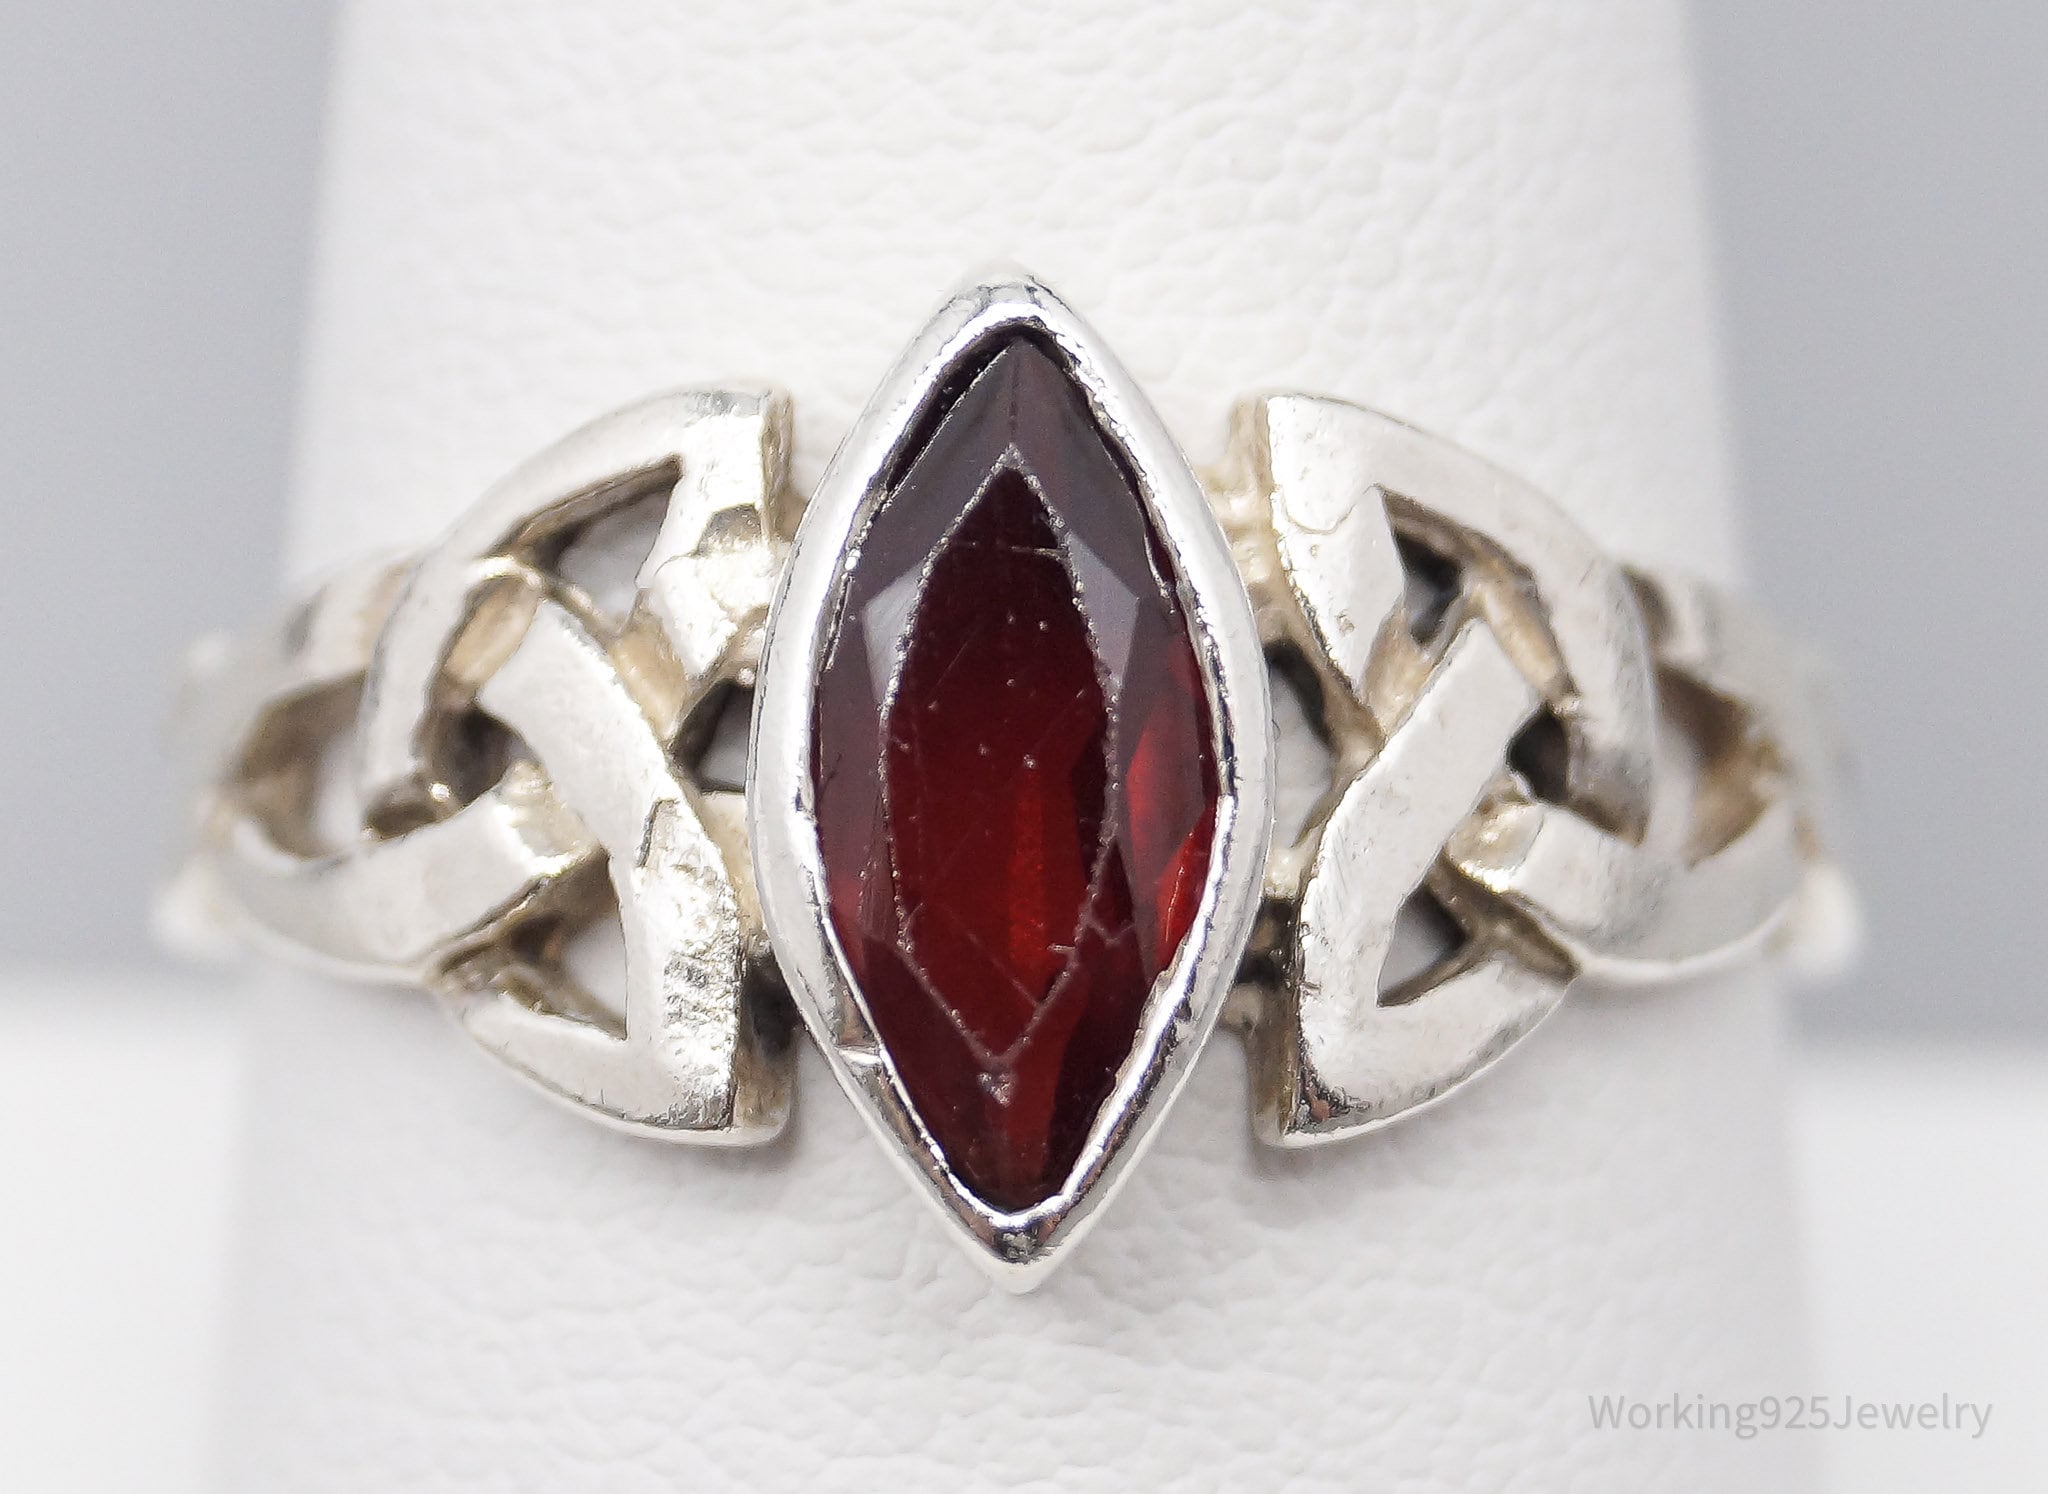 Vintage Garnet Triquetra Trinity Knot Sterling Silver Ring - Size 9